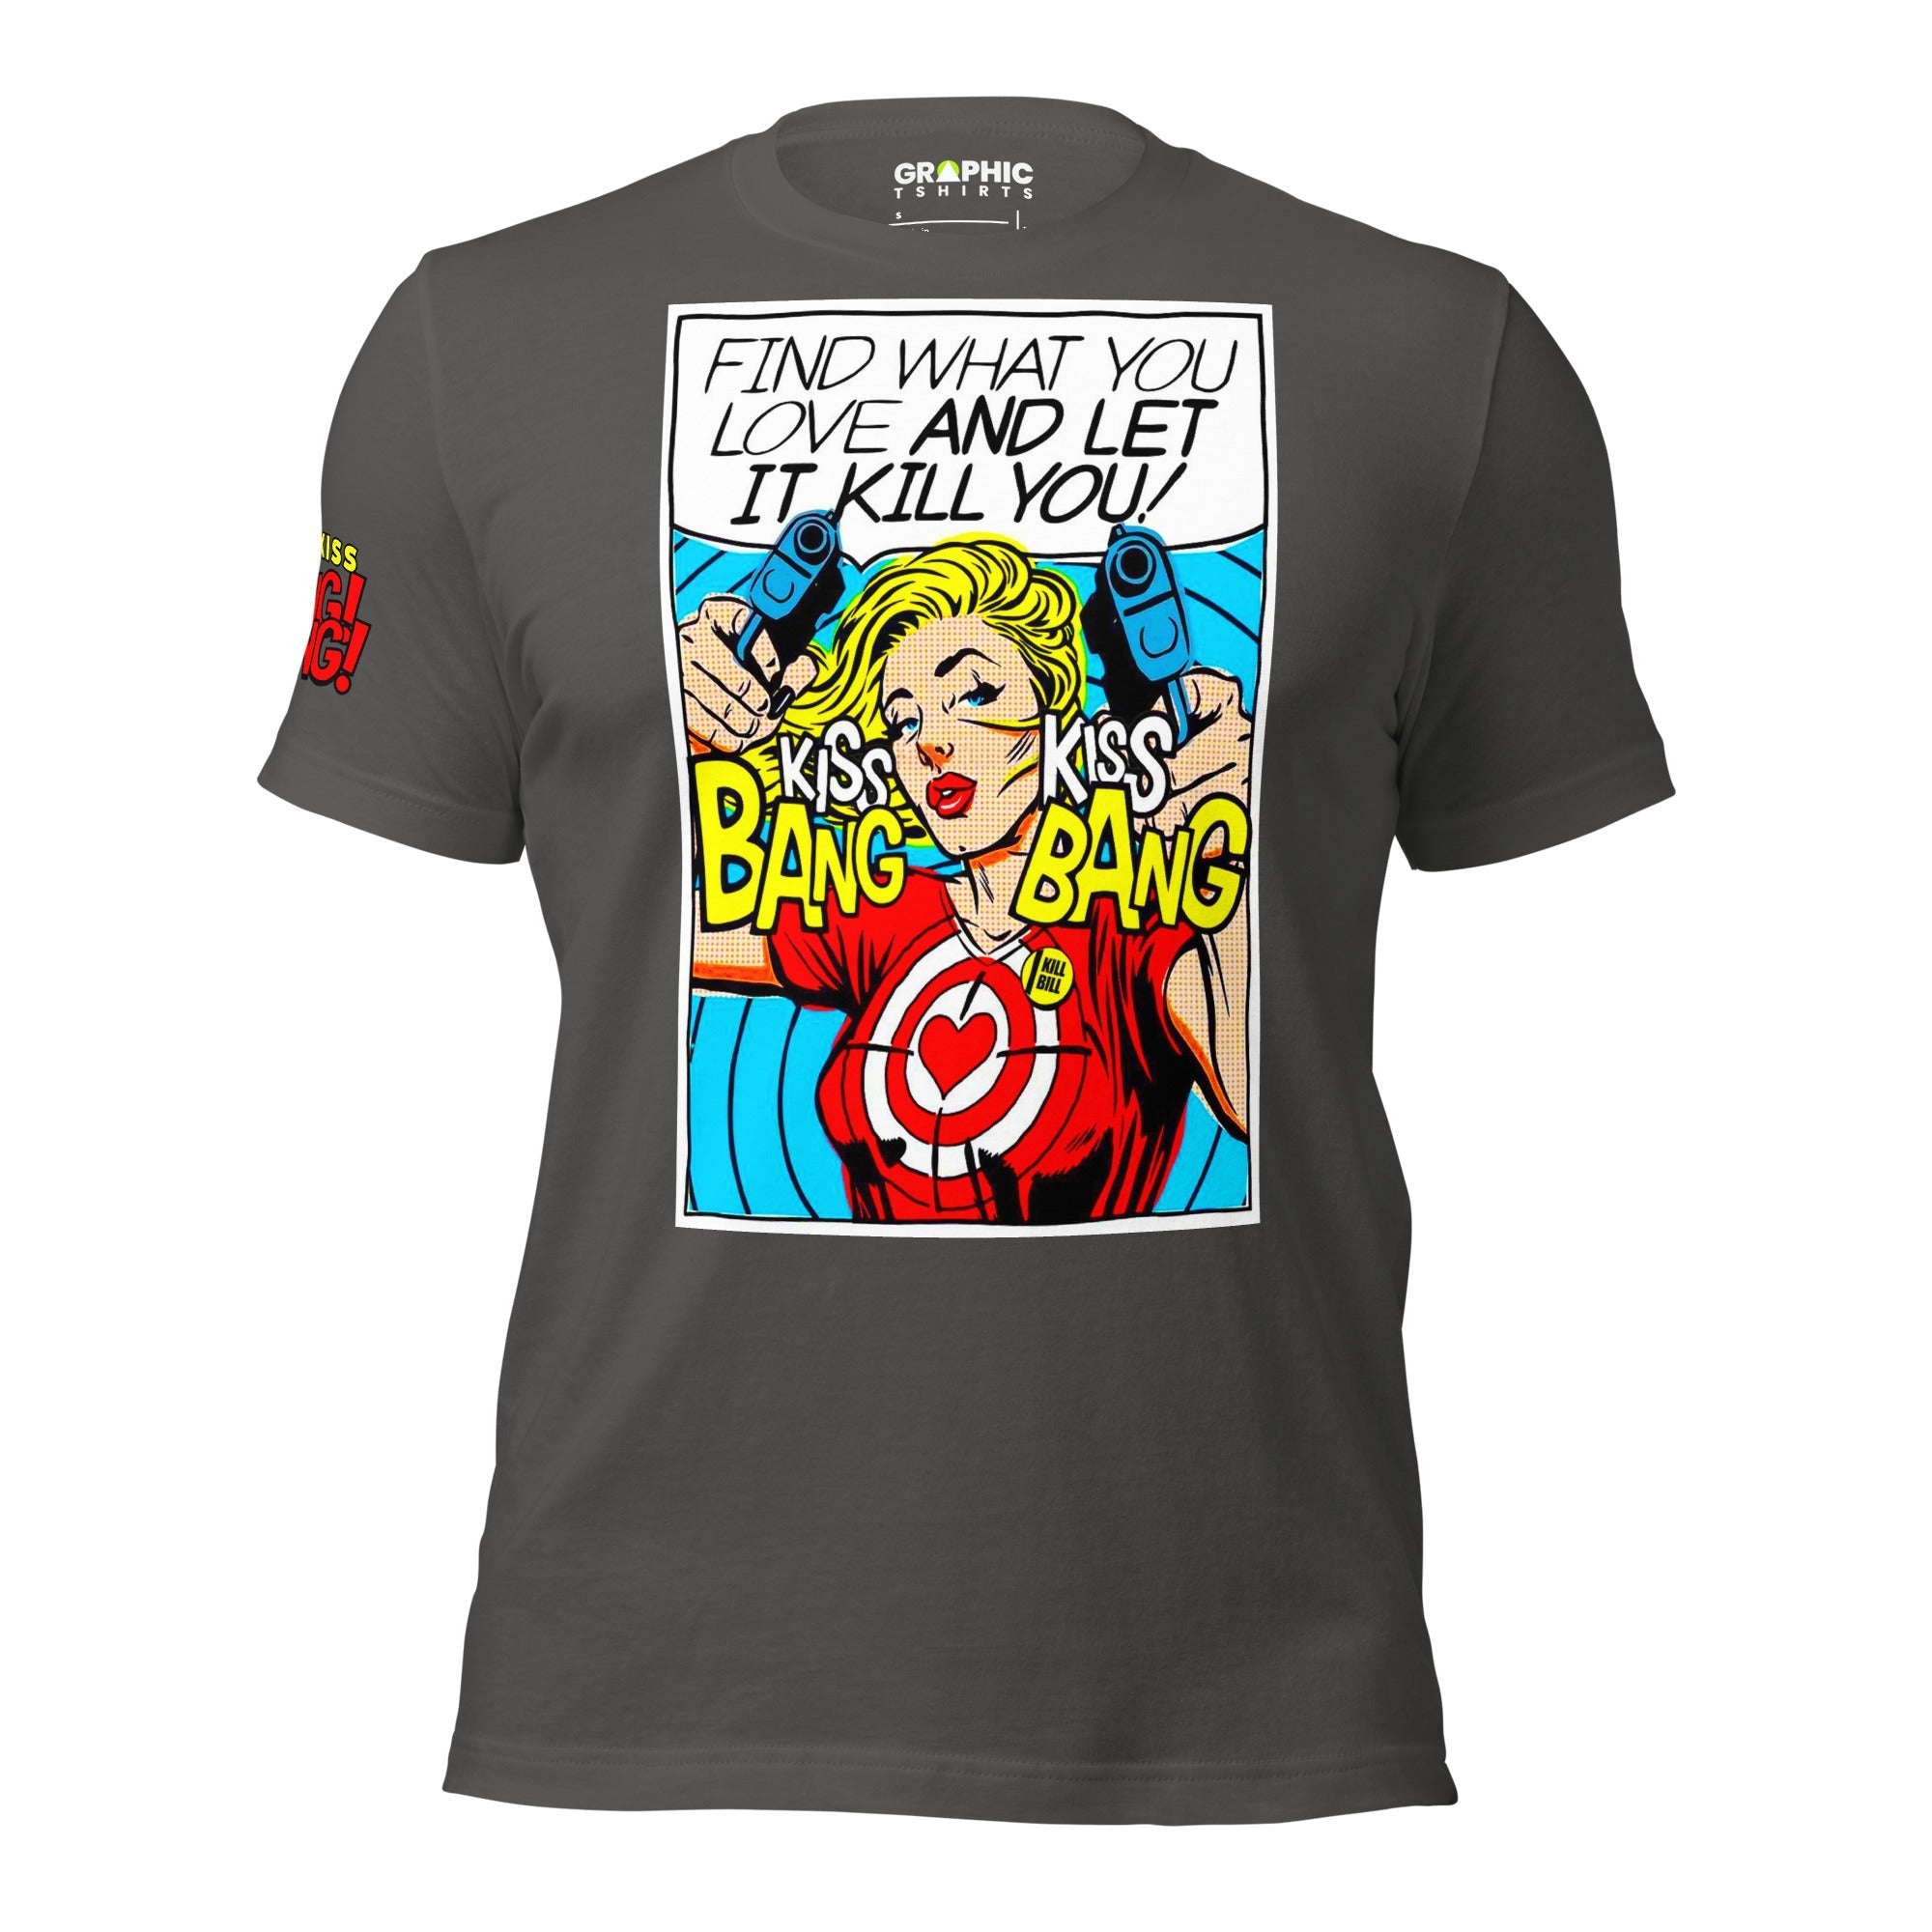 Unisex Crew Neck T-Shirt - Find What You Love And Let It Kill You! Kiss! Kiss! Bang! Bang! - GRAPHIC T-SHIRTS